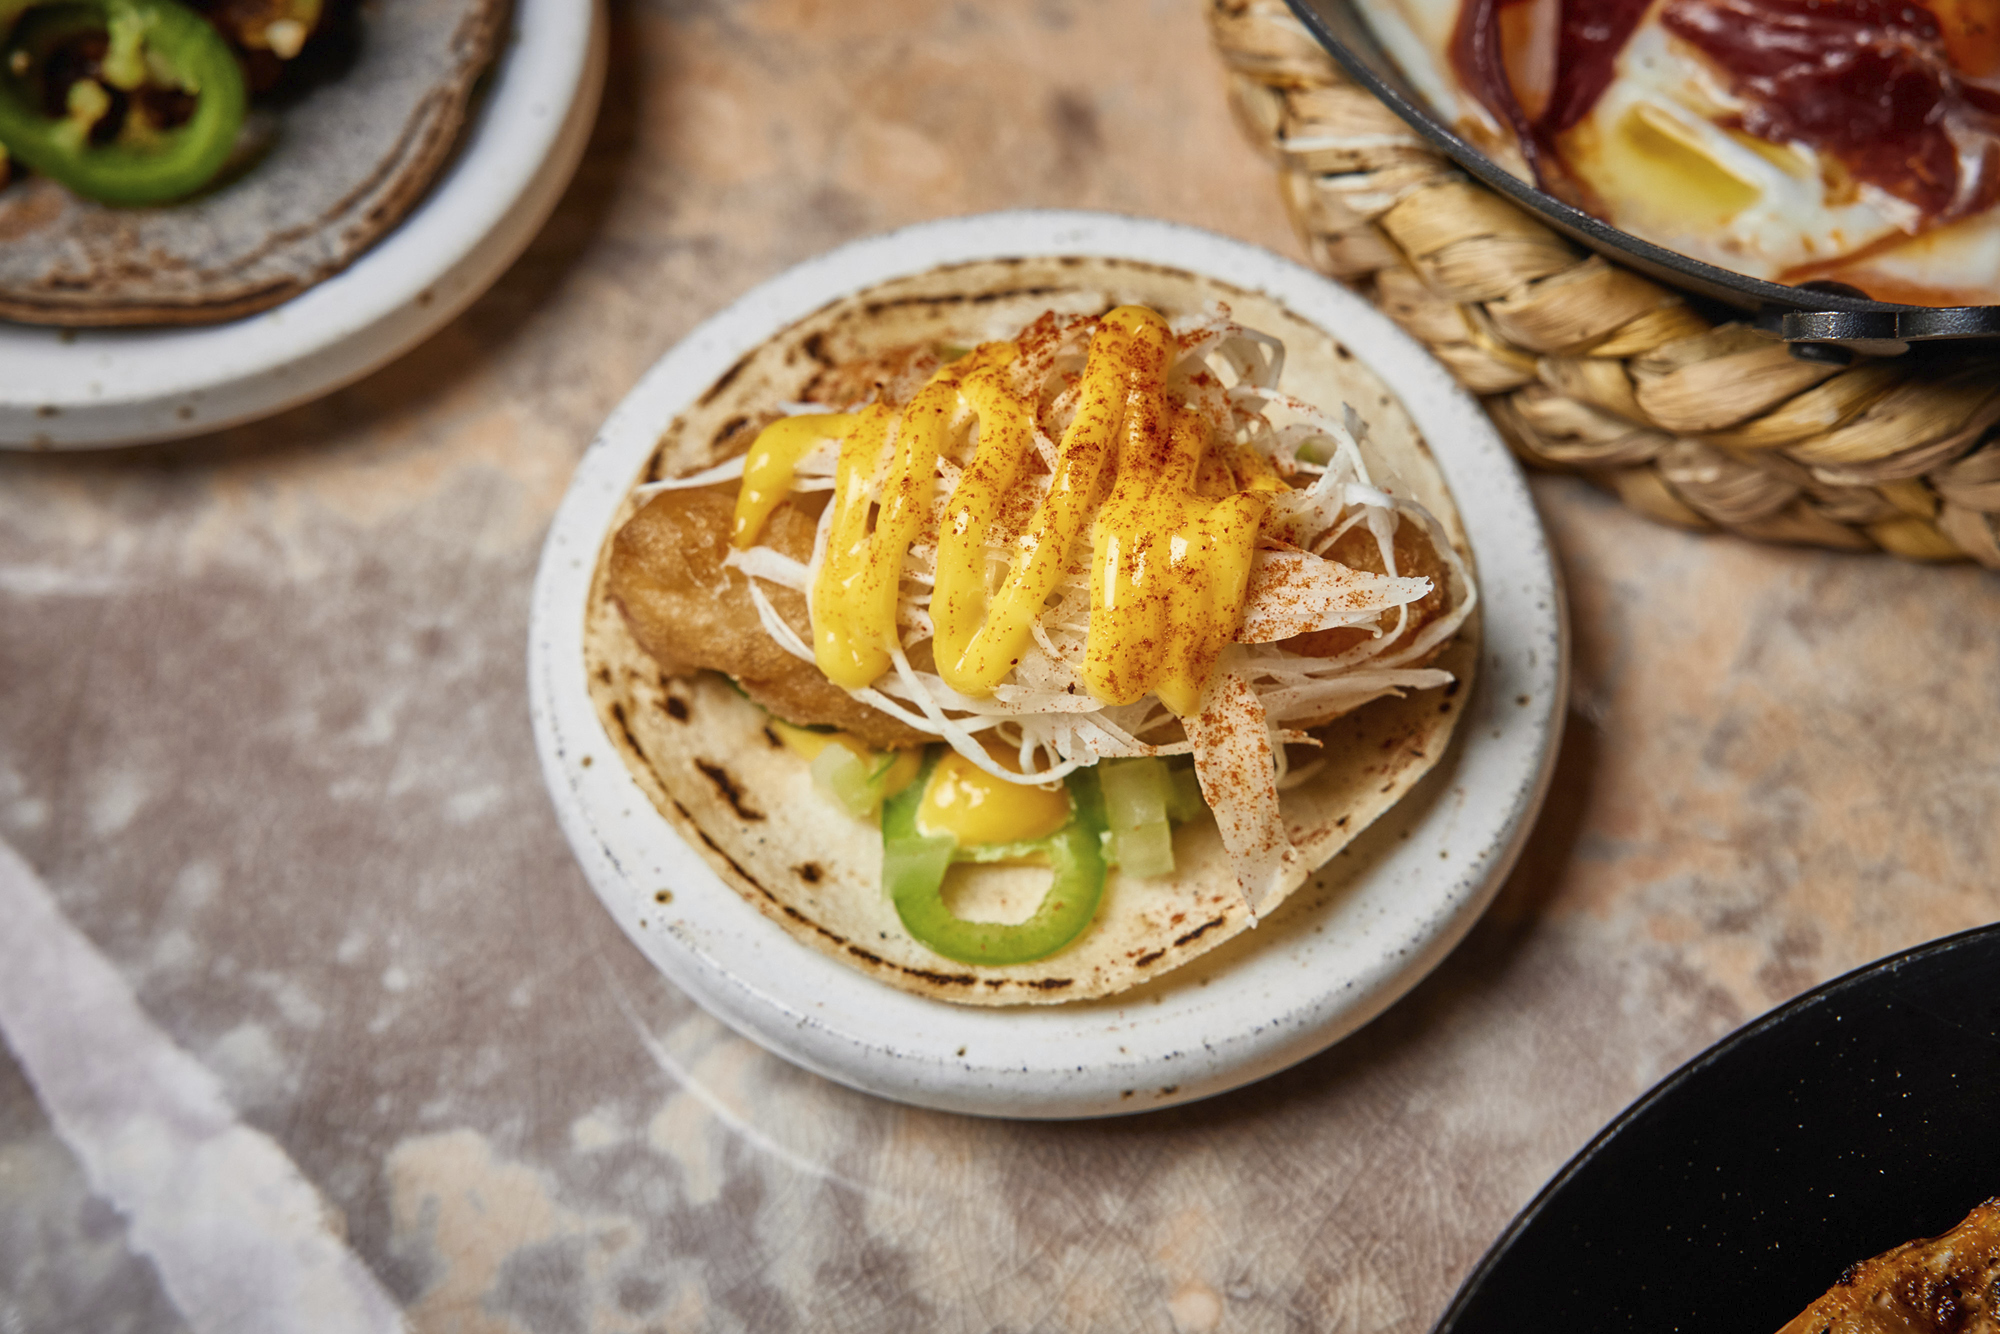 Baja fish tacos are a must-order from the Decimo brunch menu